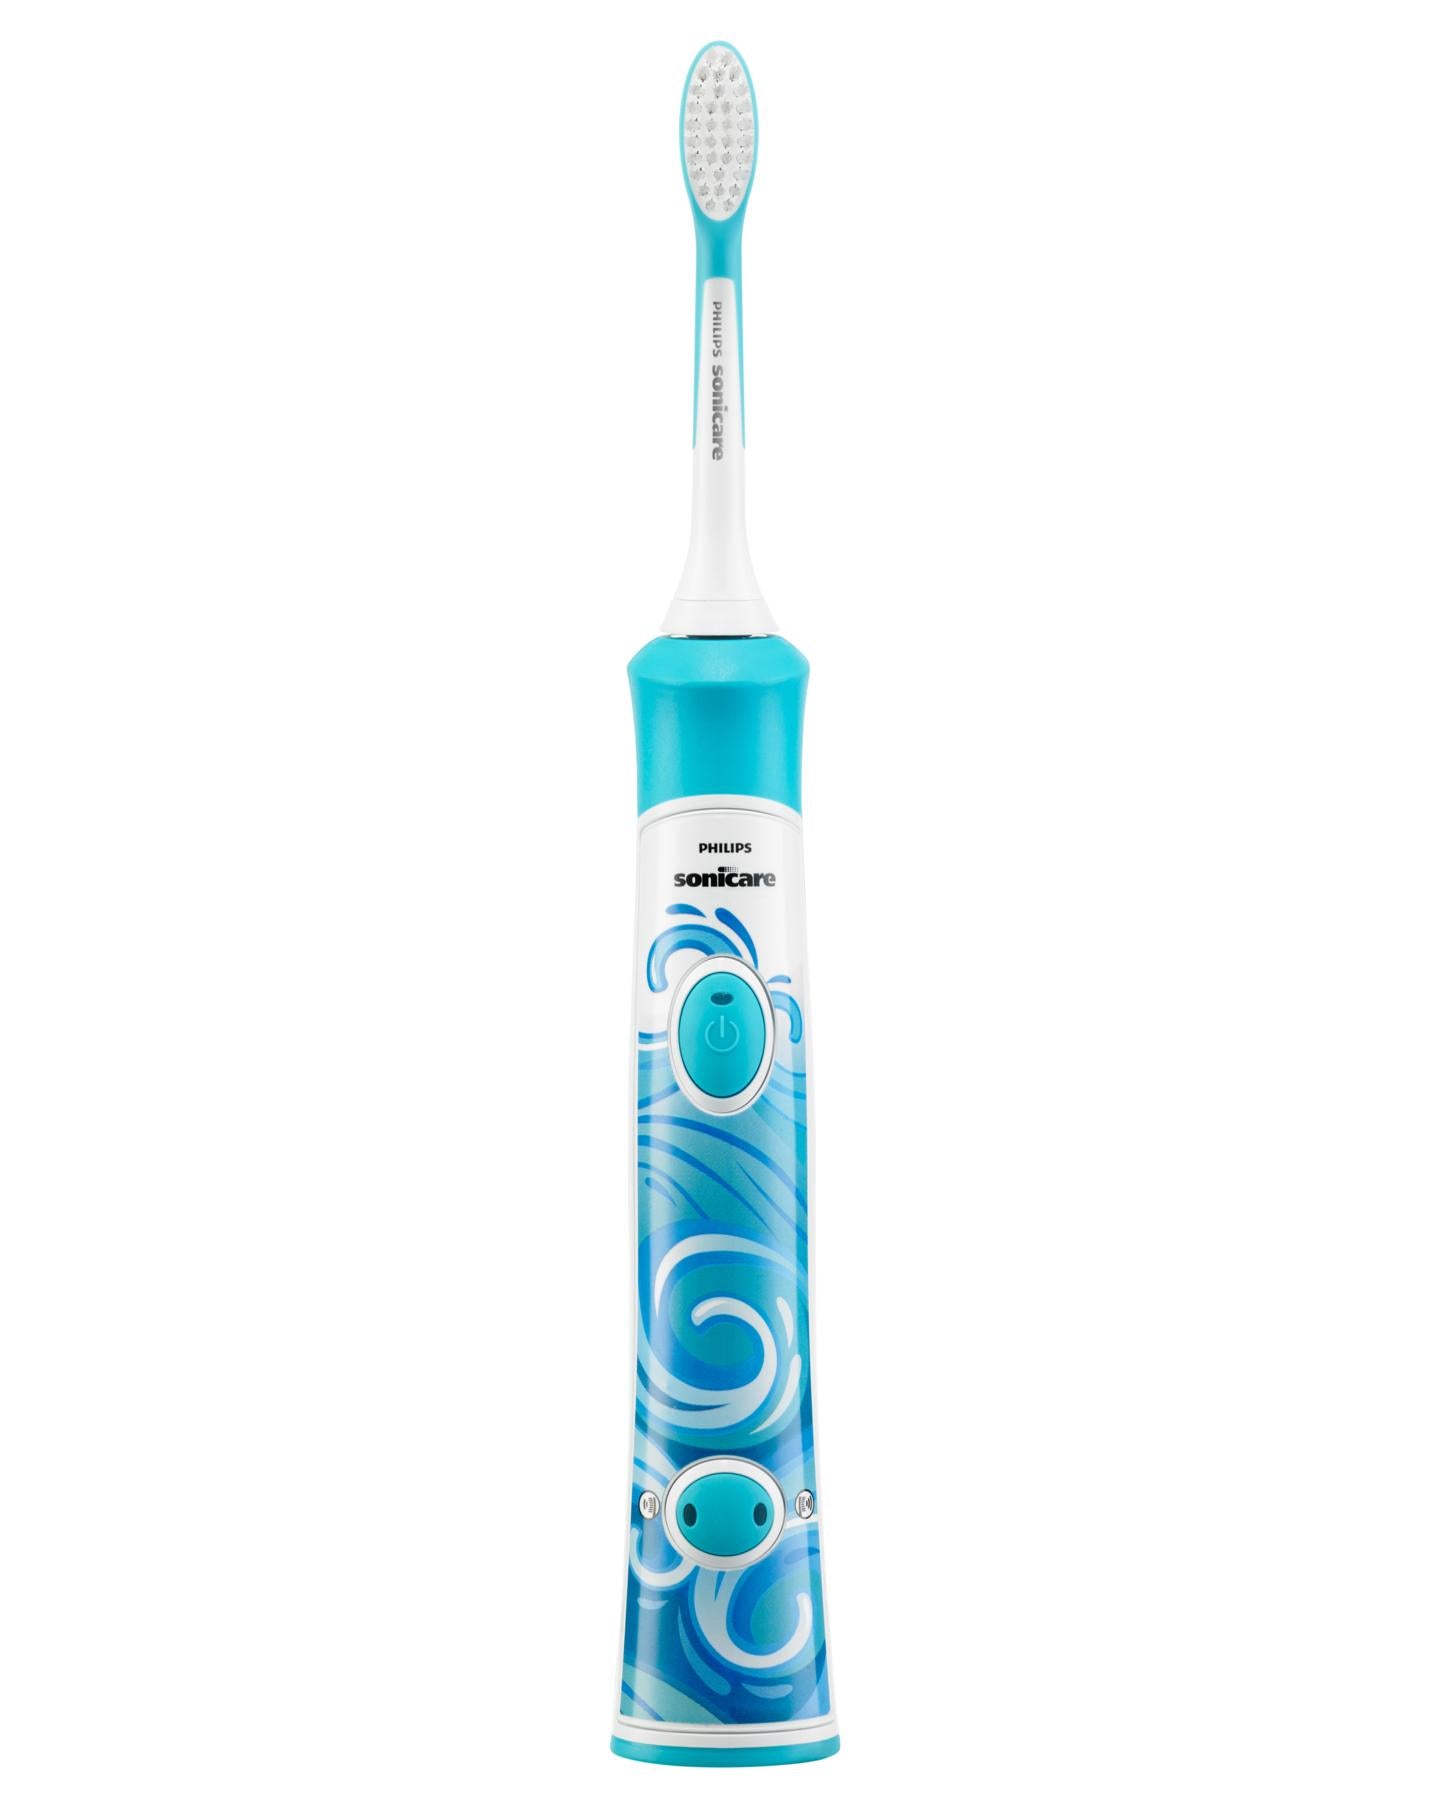 Philips Sonicare For Kids Sonic electric toothbrush